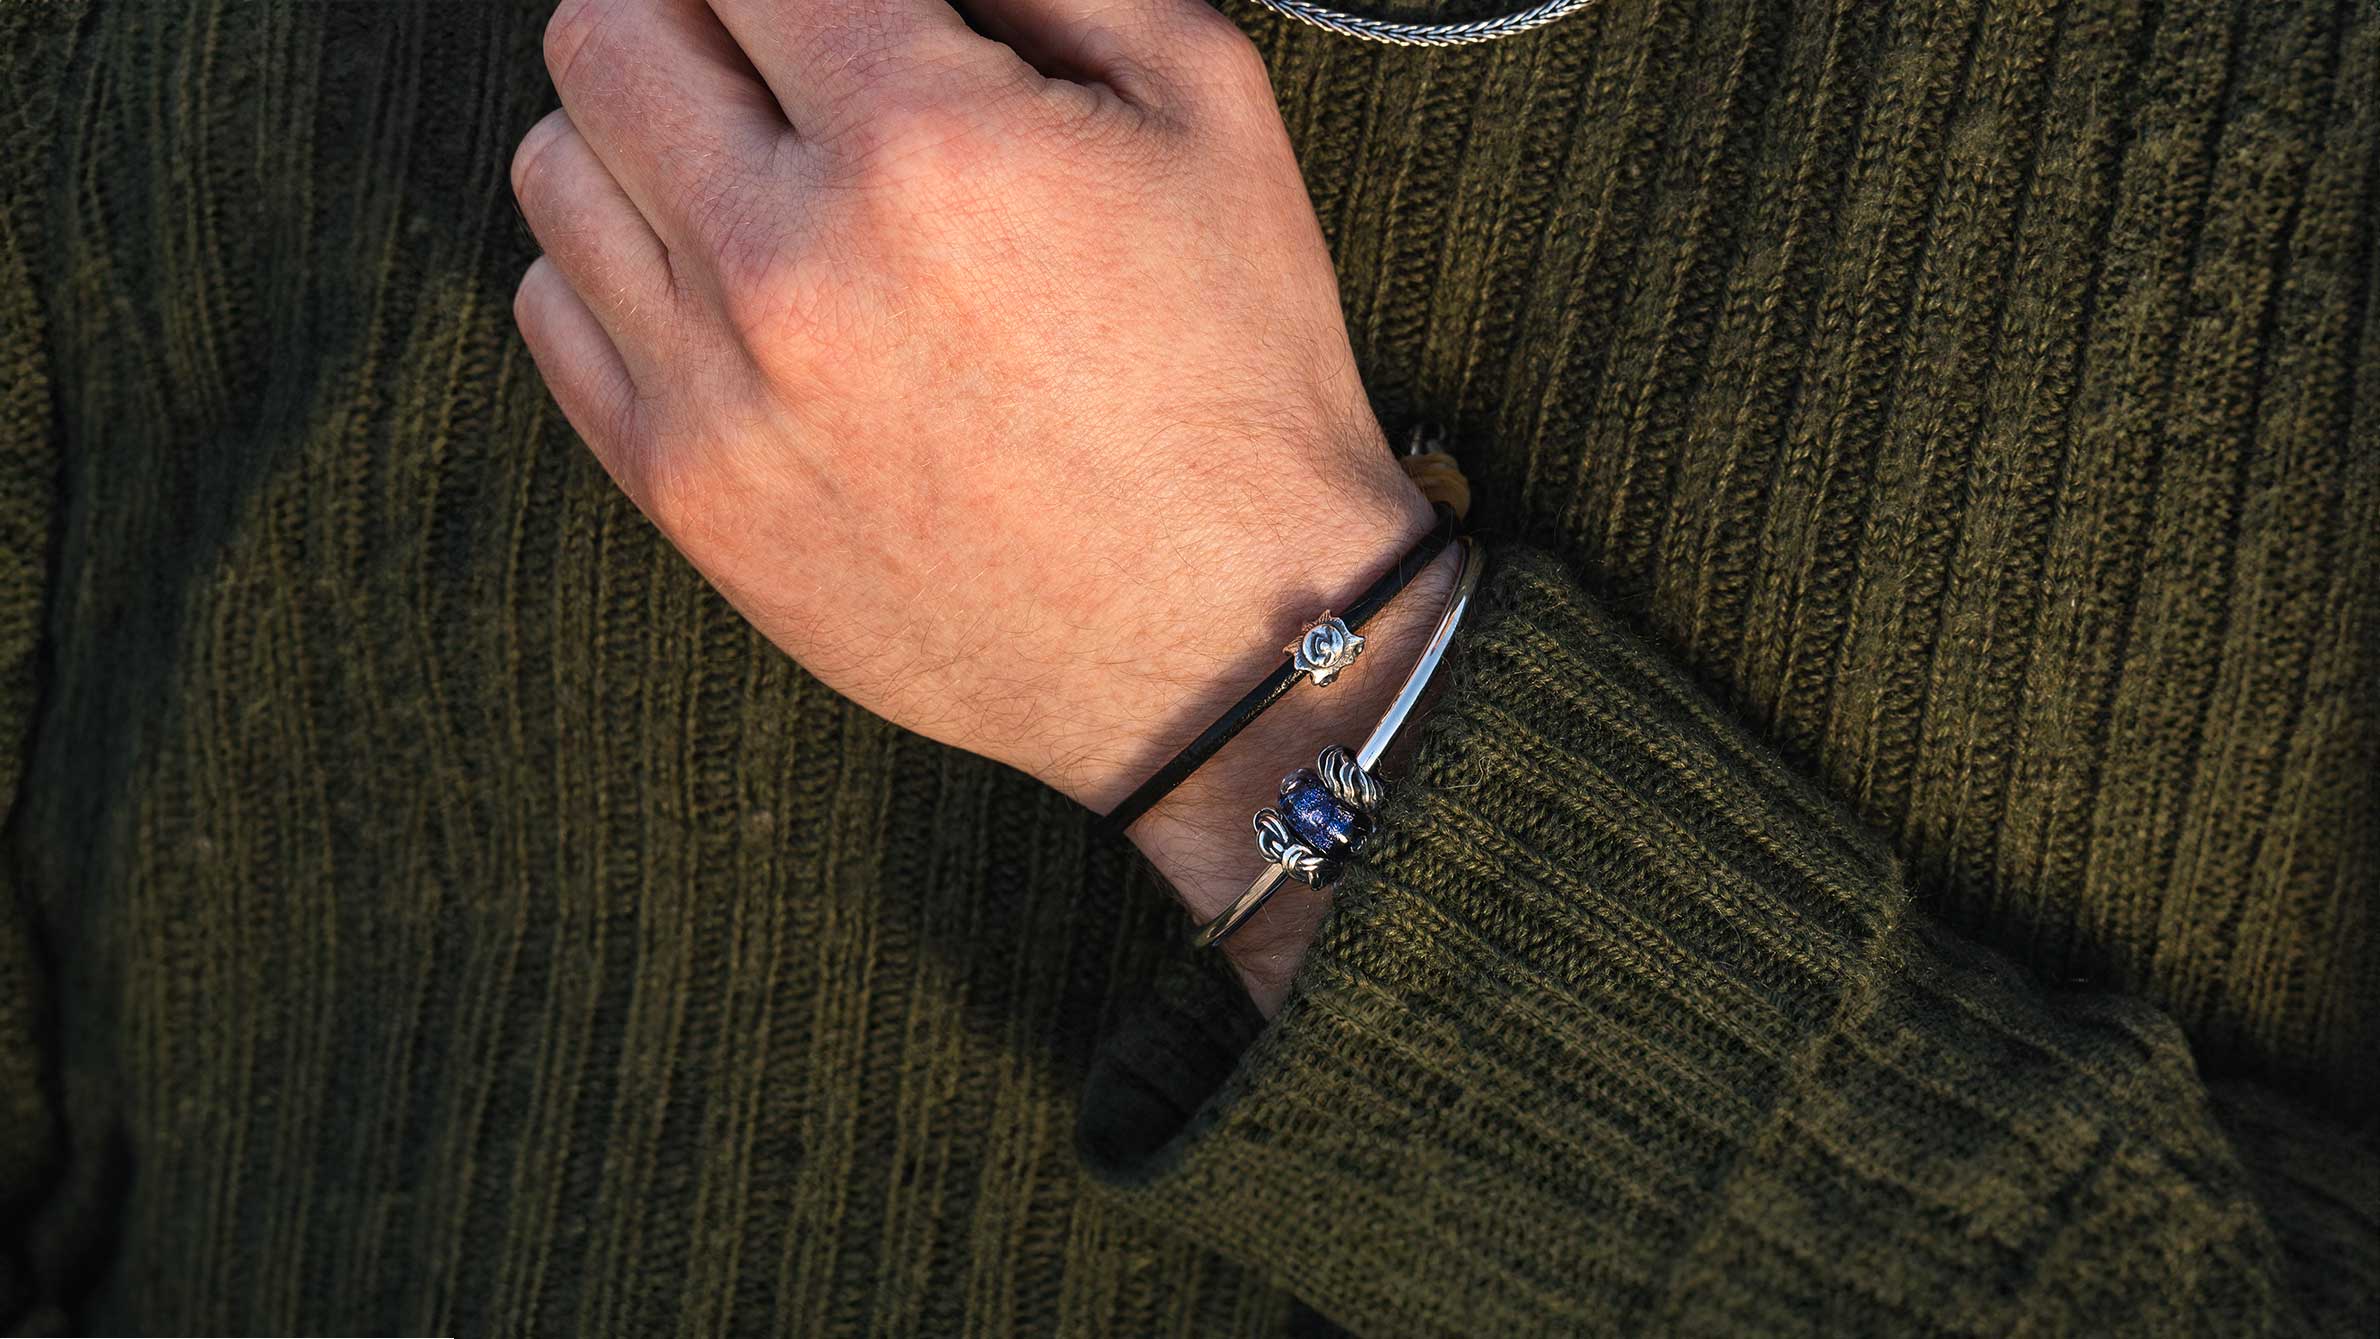 Trollbeads Sunshine silver bead on a leather bracelet complemented by a silver bangle with a blue glass bead and two silver spacers on a male model wearing a green knit sweater